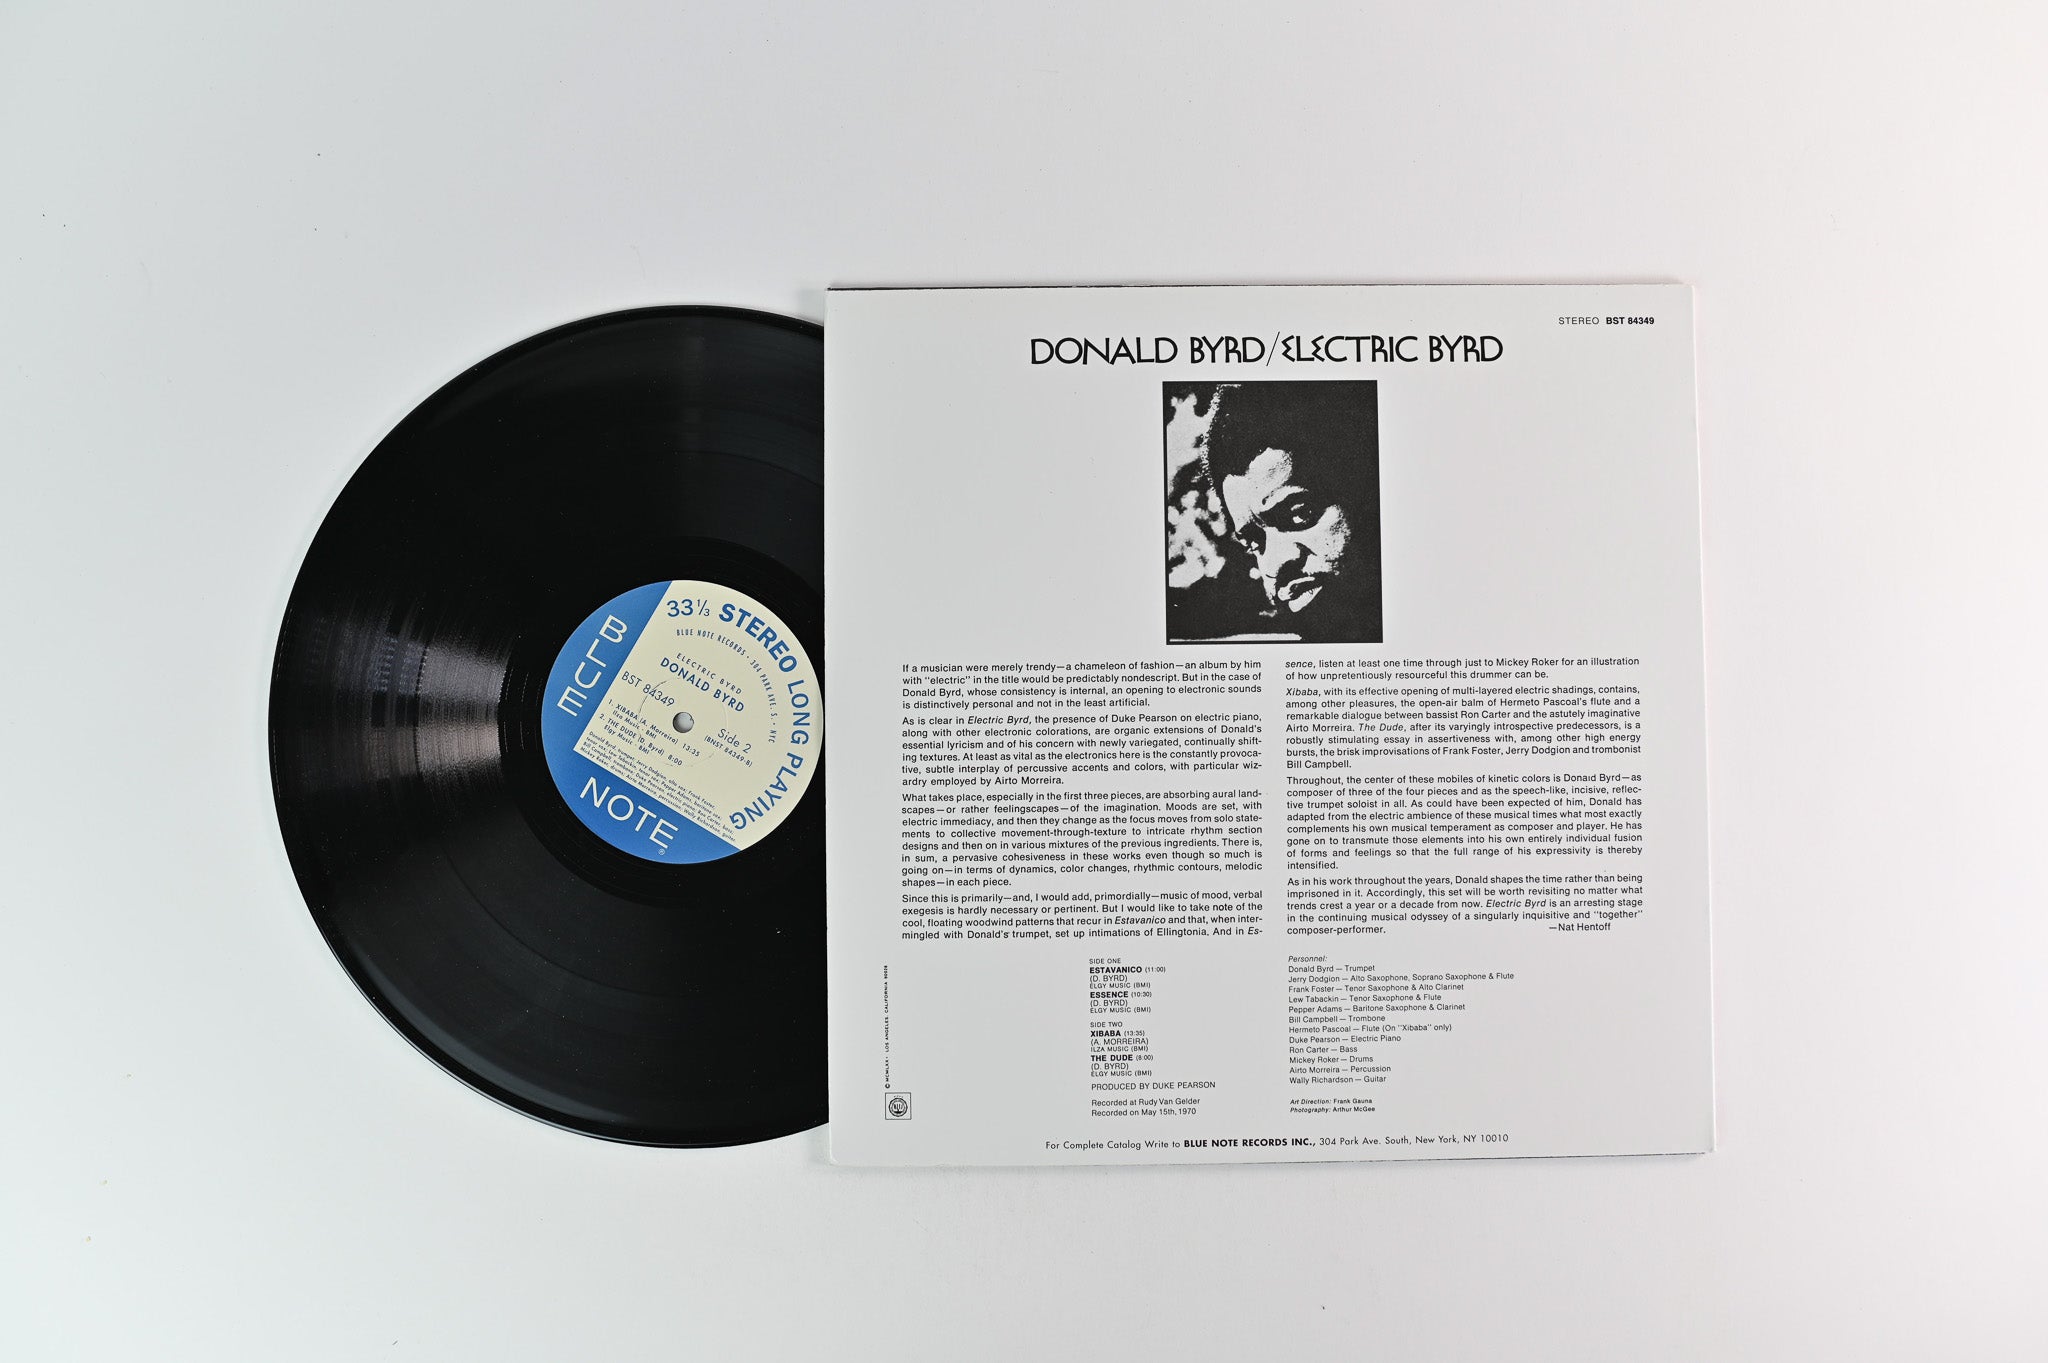 Donald Byrd - Electric Byrd on Blue Note Reissue